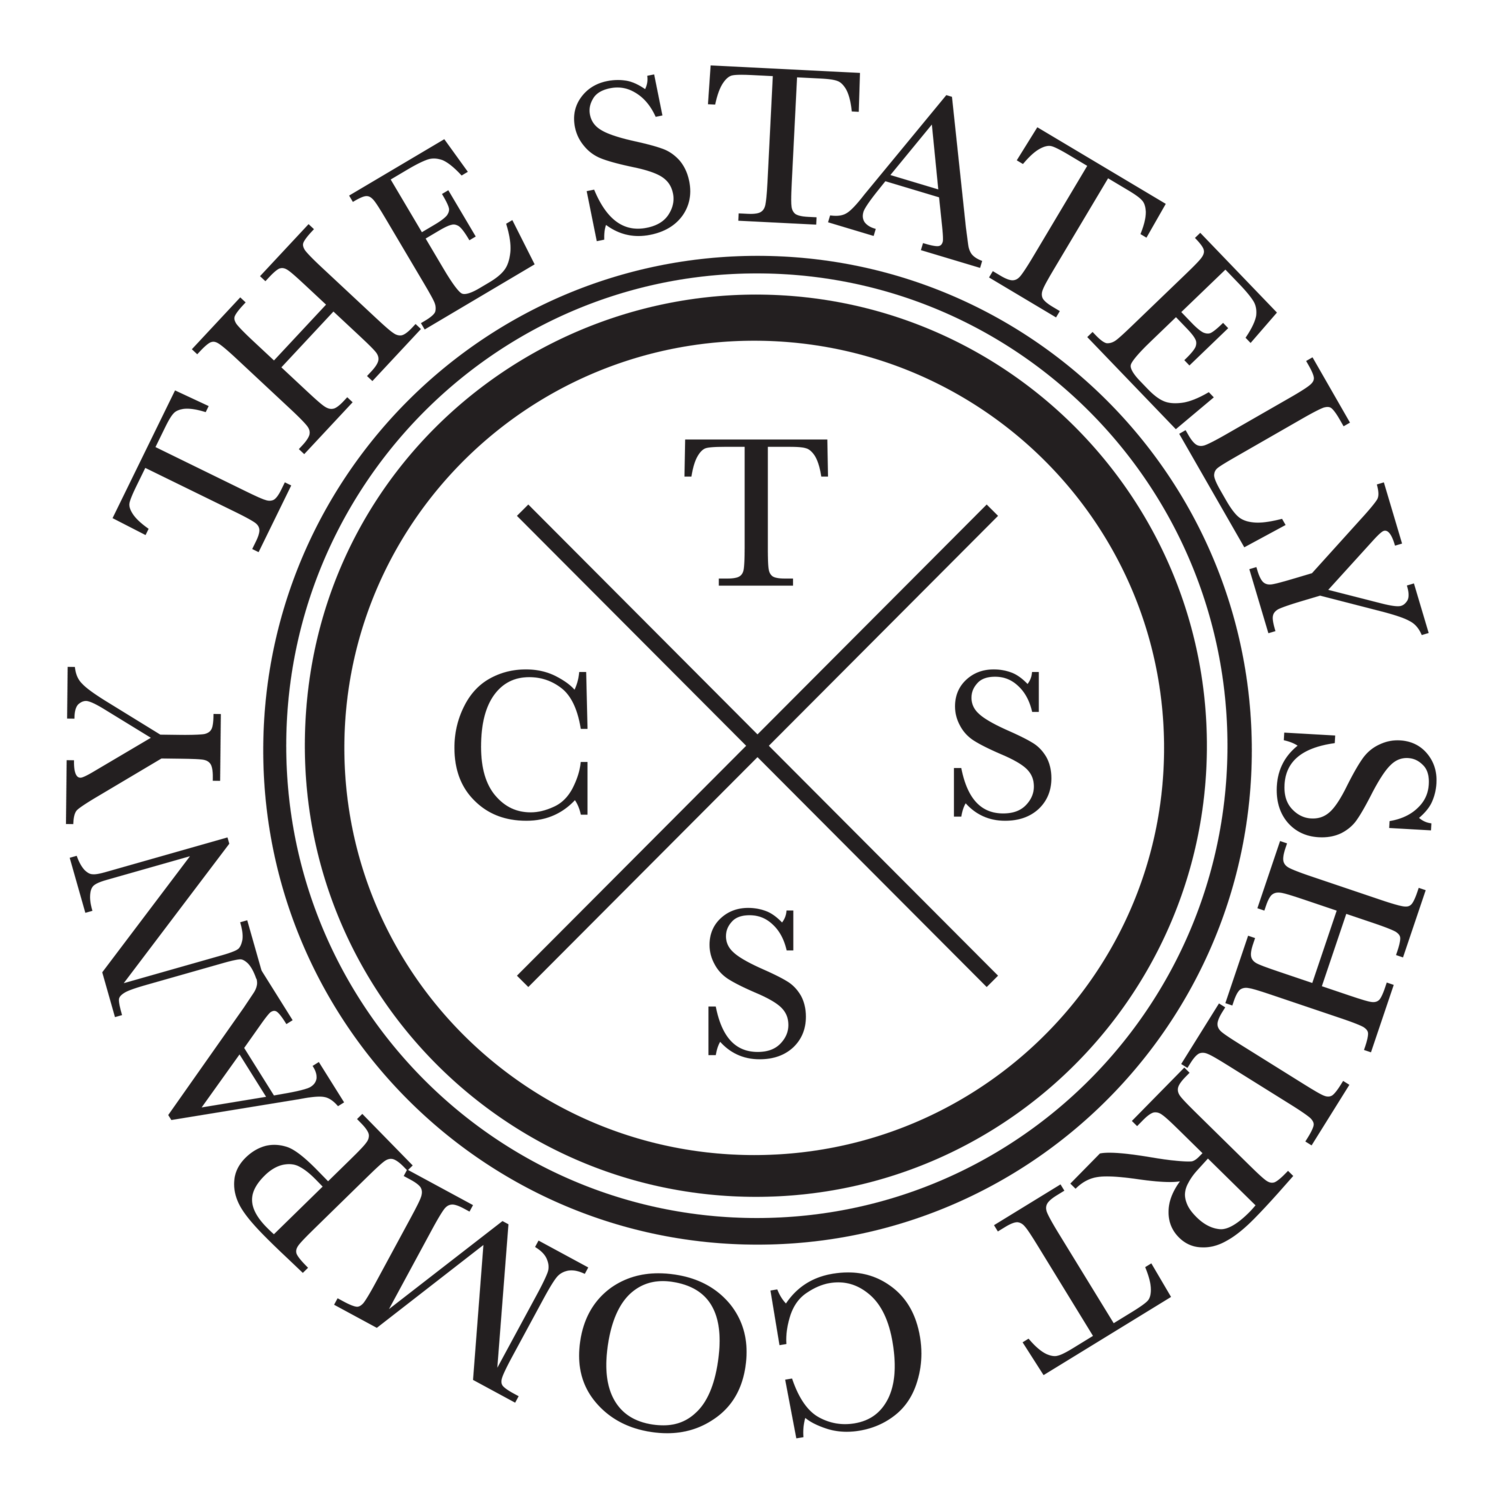  The Stately Shirt Co.